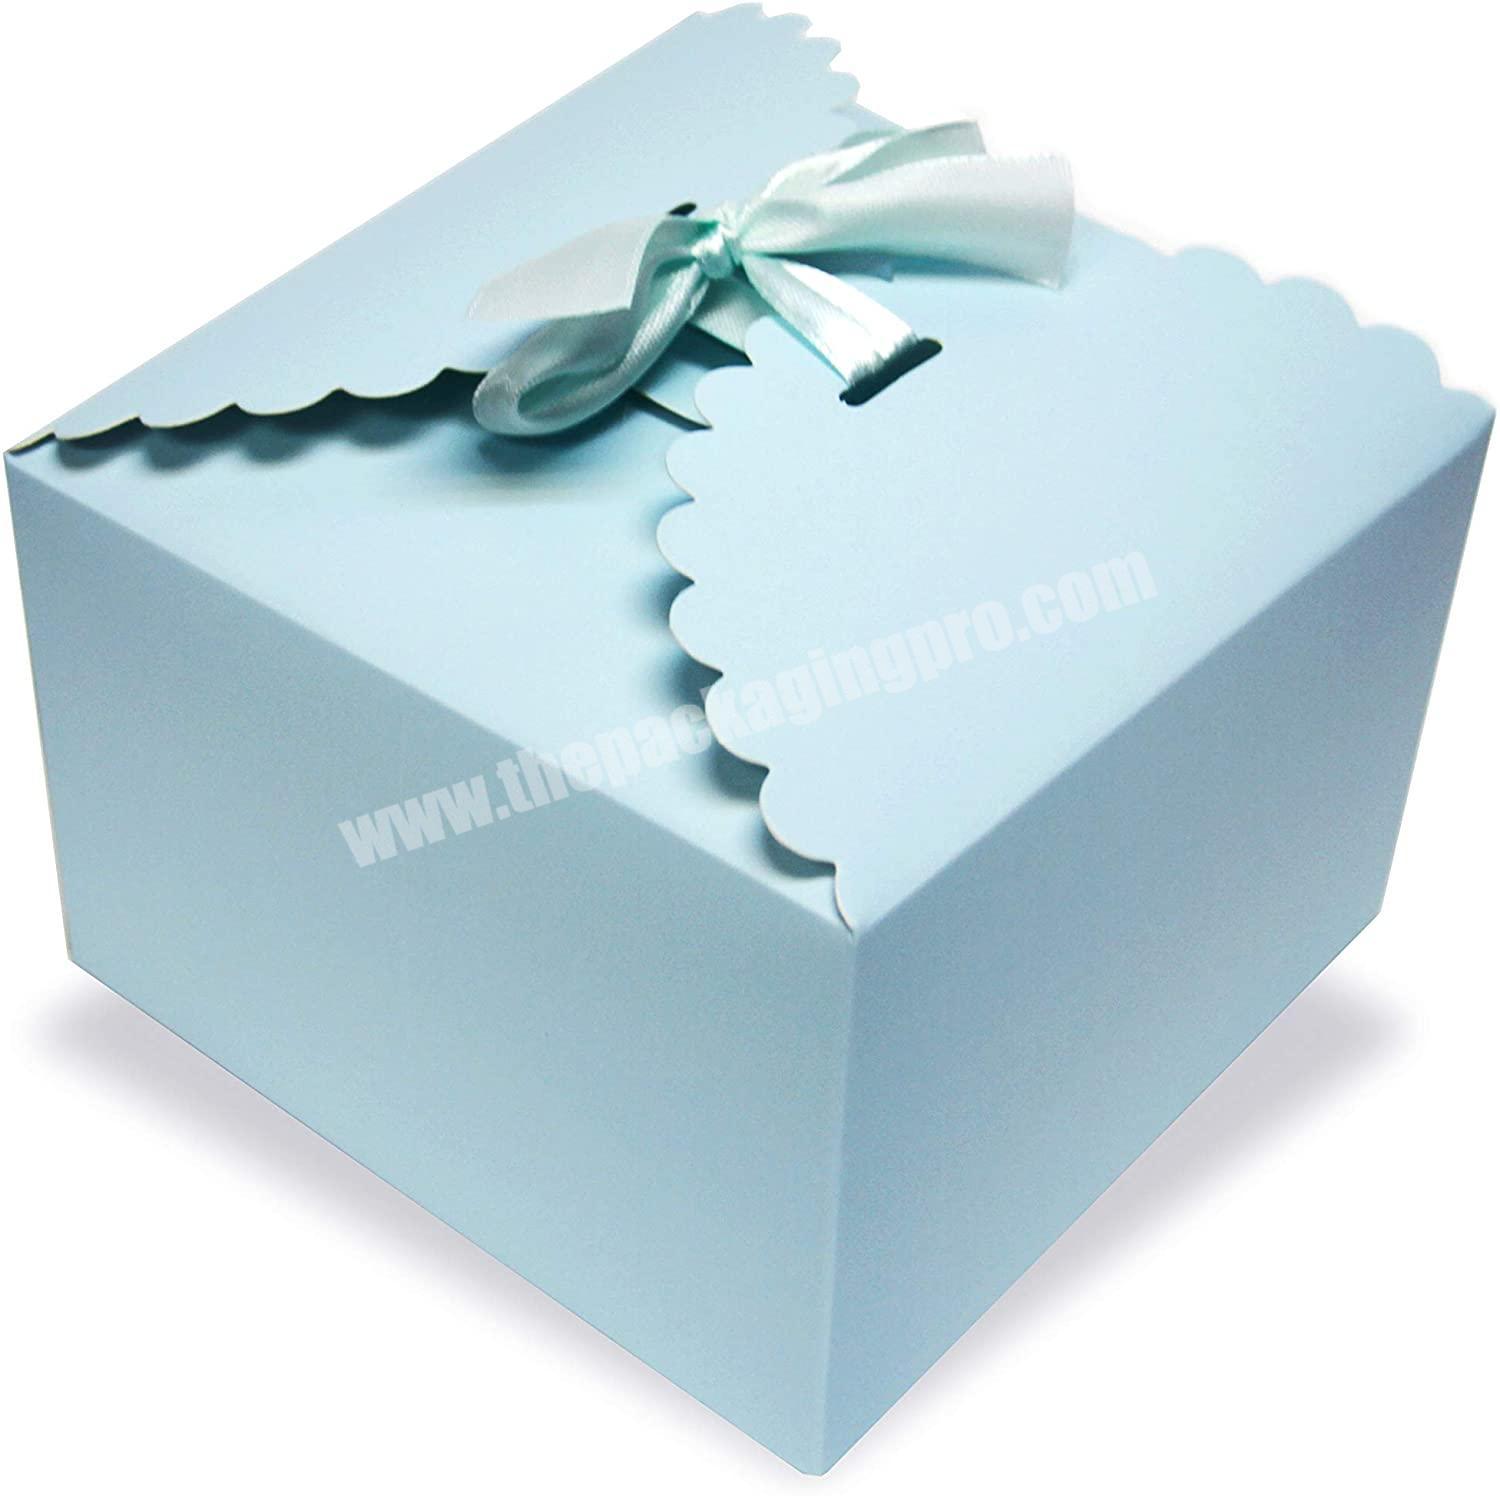 Decorative Party Favor Gift Treat Boxes Thick 400gsm Card  5.8 x 5.8 x 3.7 inches, Easy Folding  Gift Boxes